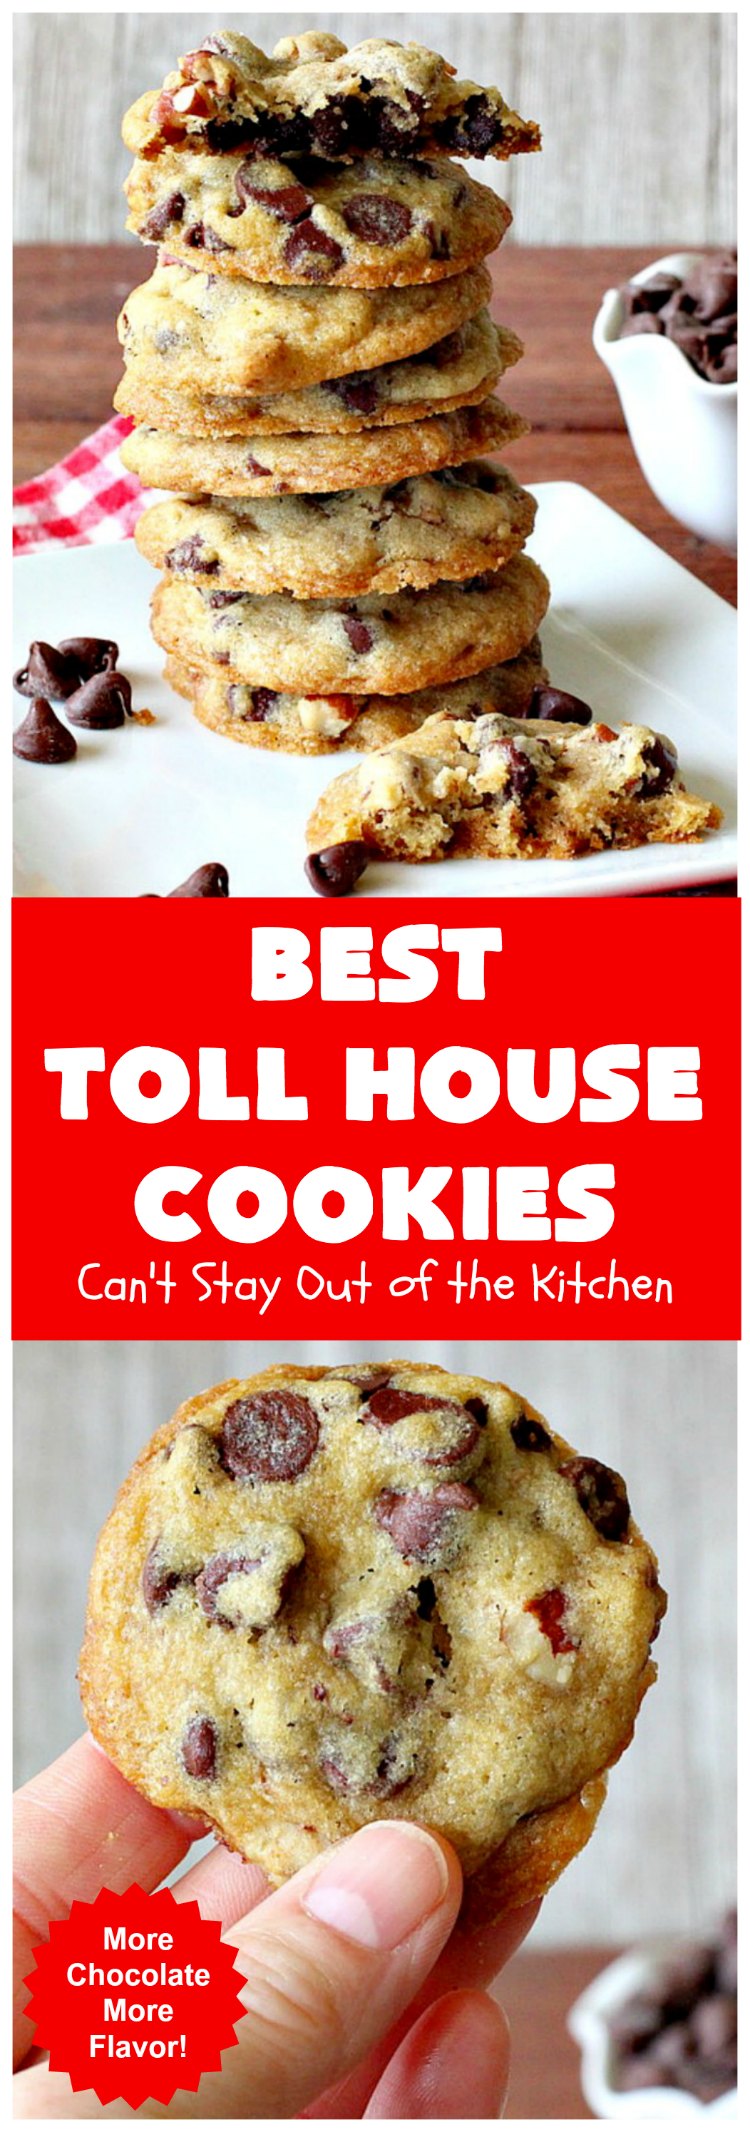 Best Toll House Cookies | Can't Stay Out of the Kitchen